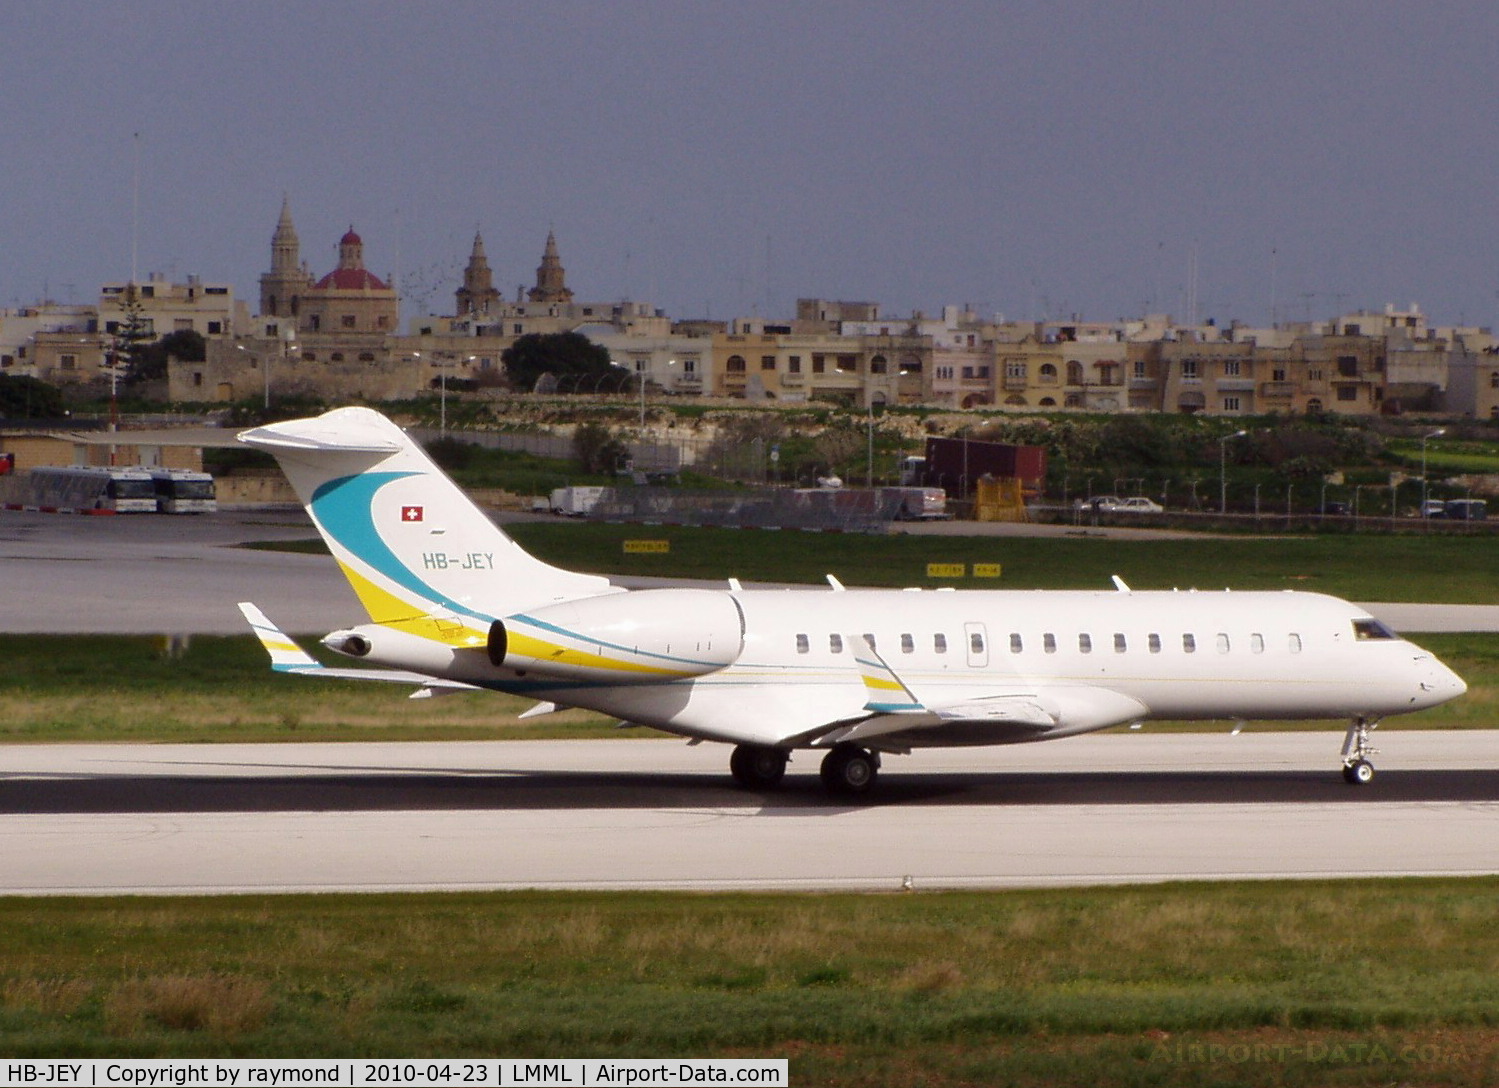 HB-JEY, 2005 Bombardier BD-700-1A10 Global Express C/N 9173, BD700 HB-JEY Comlux